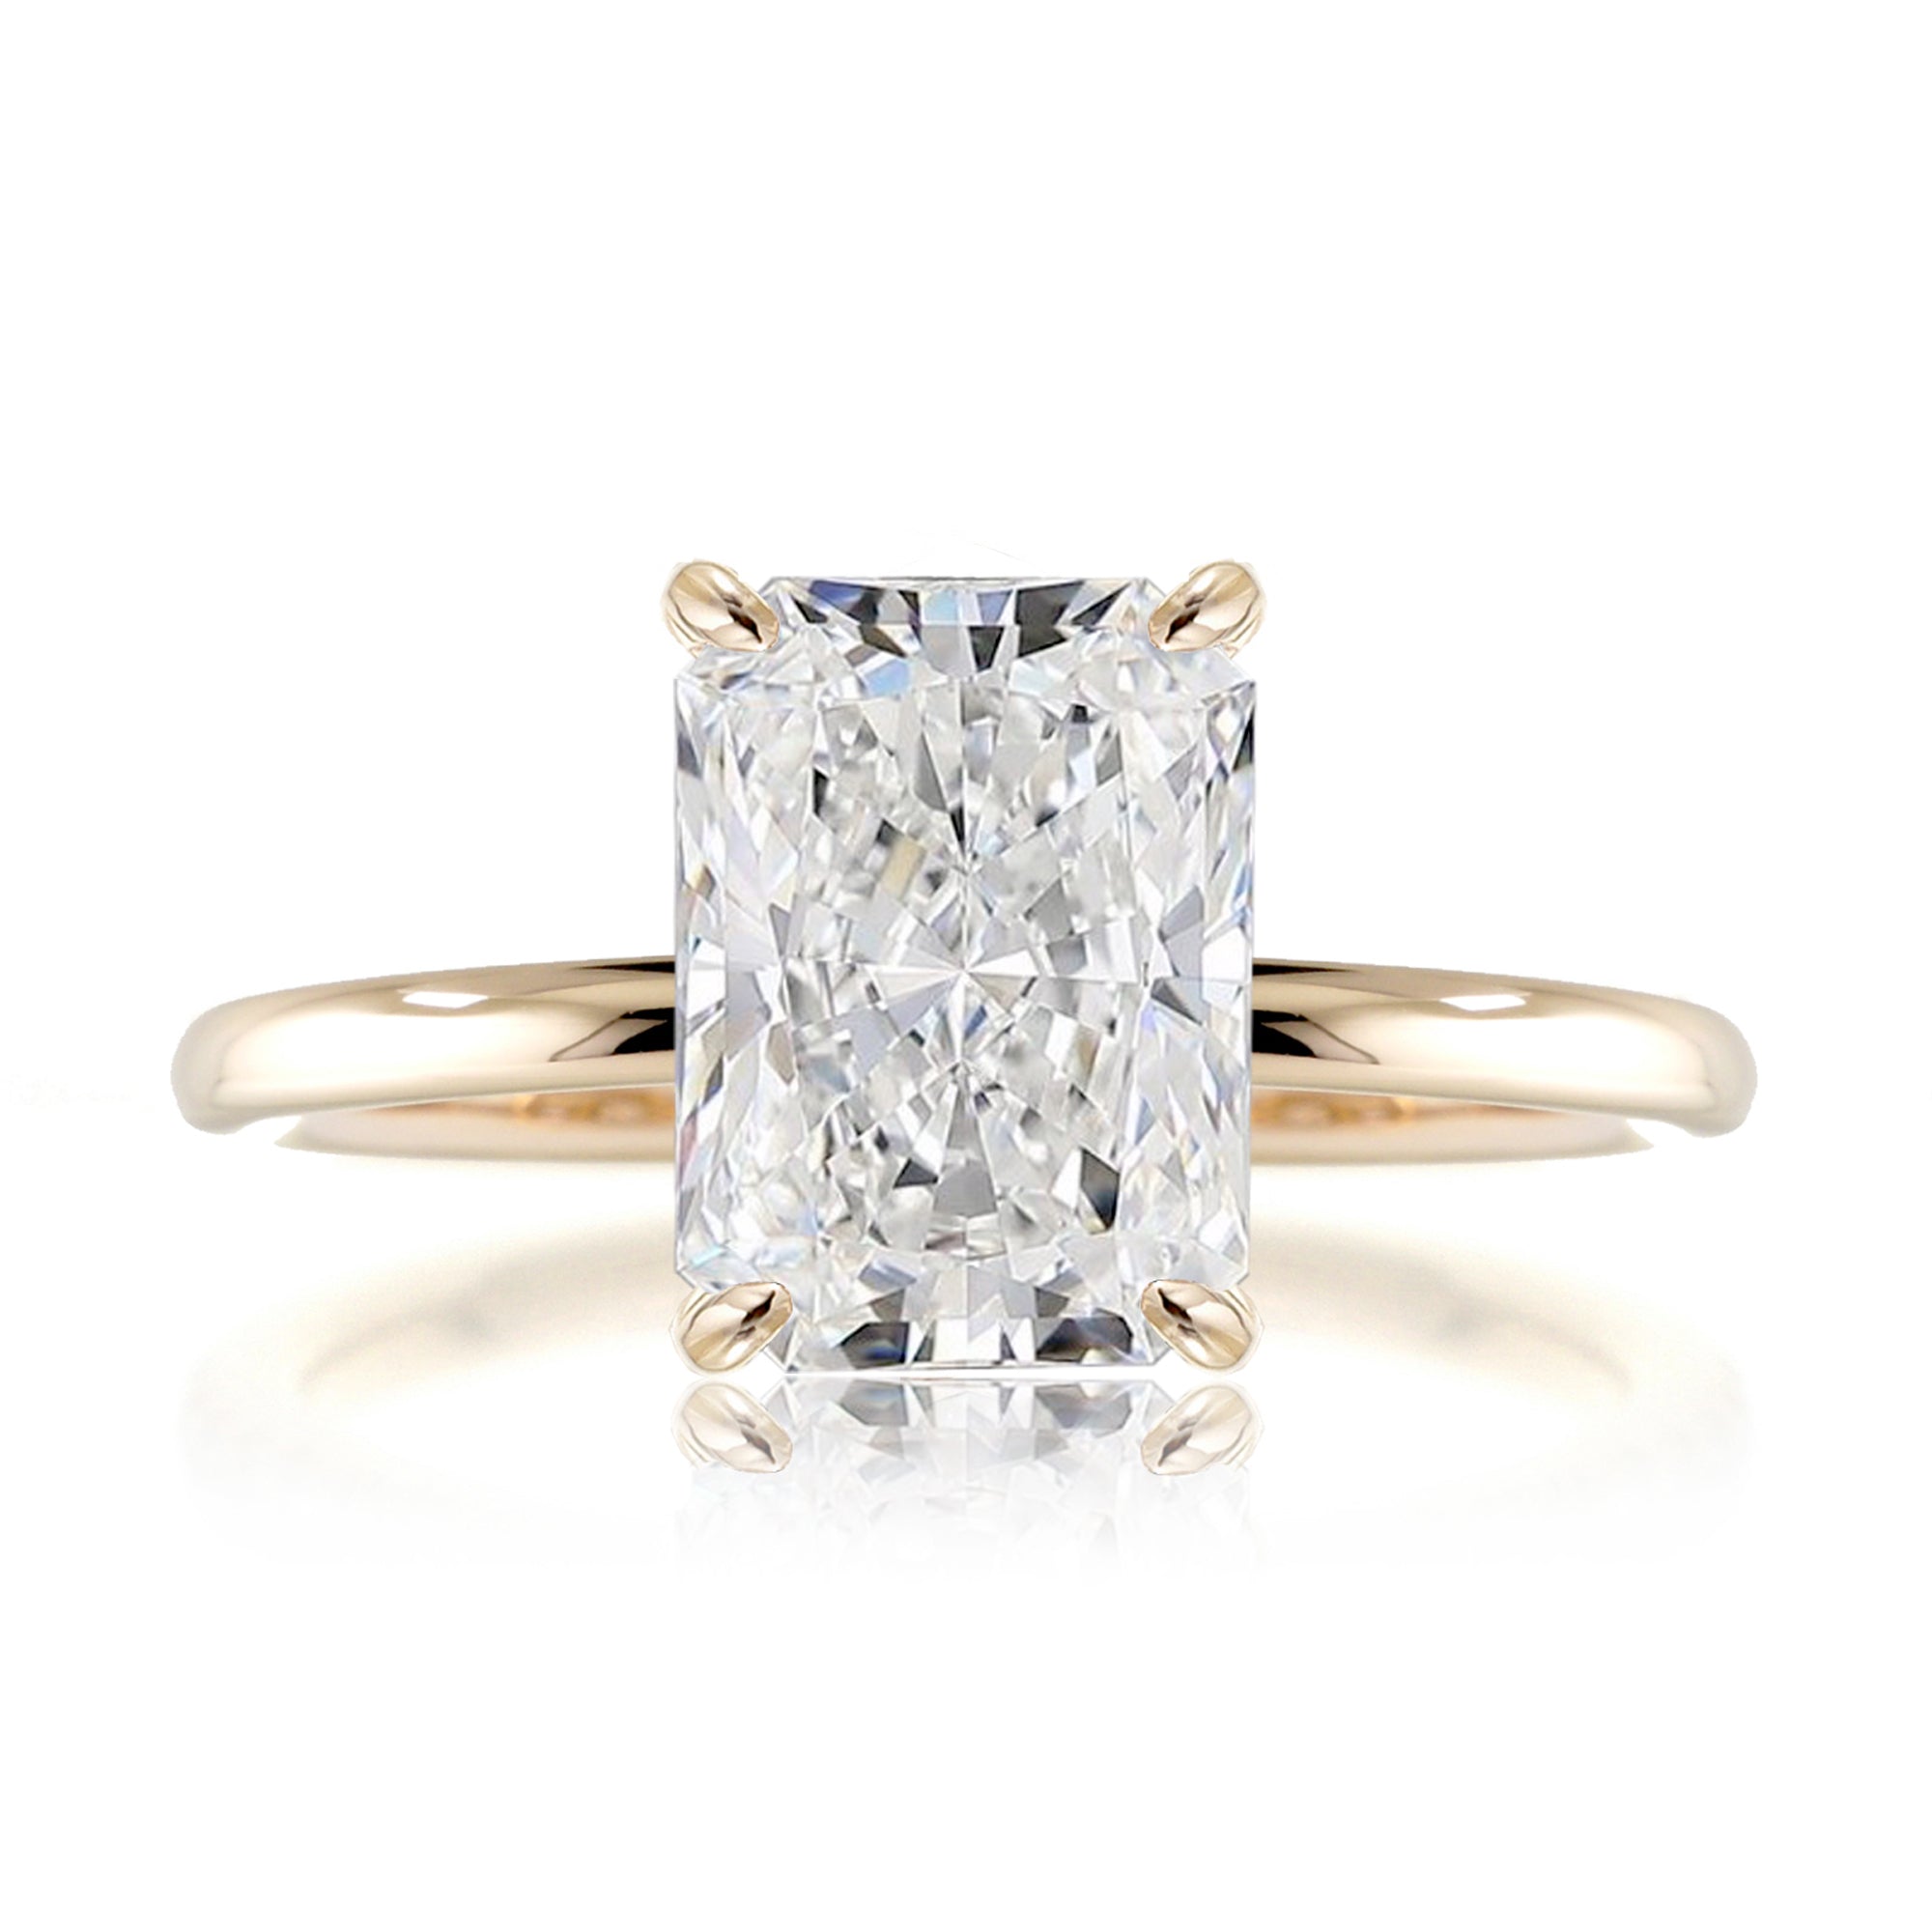 Radiant cut lab-grown diamond engagement ring yellow gold - The Ava solid band